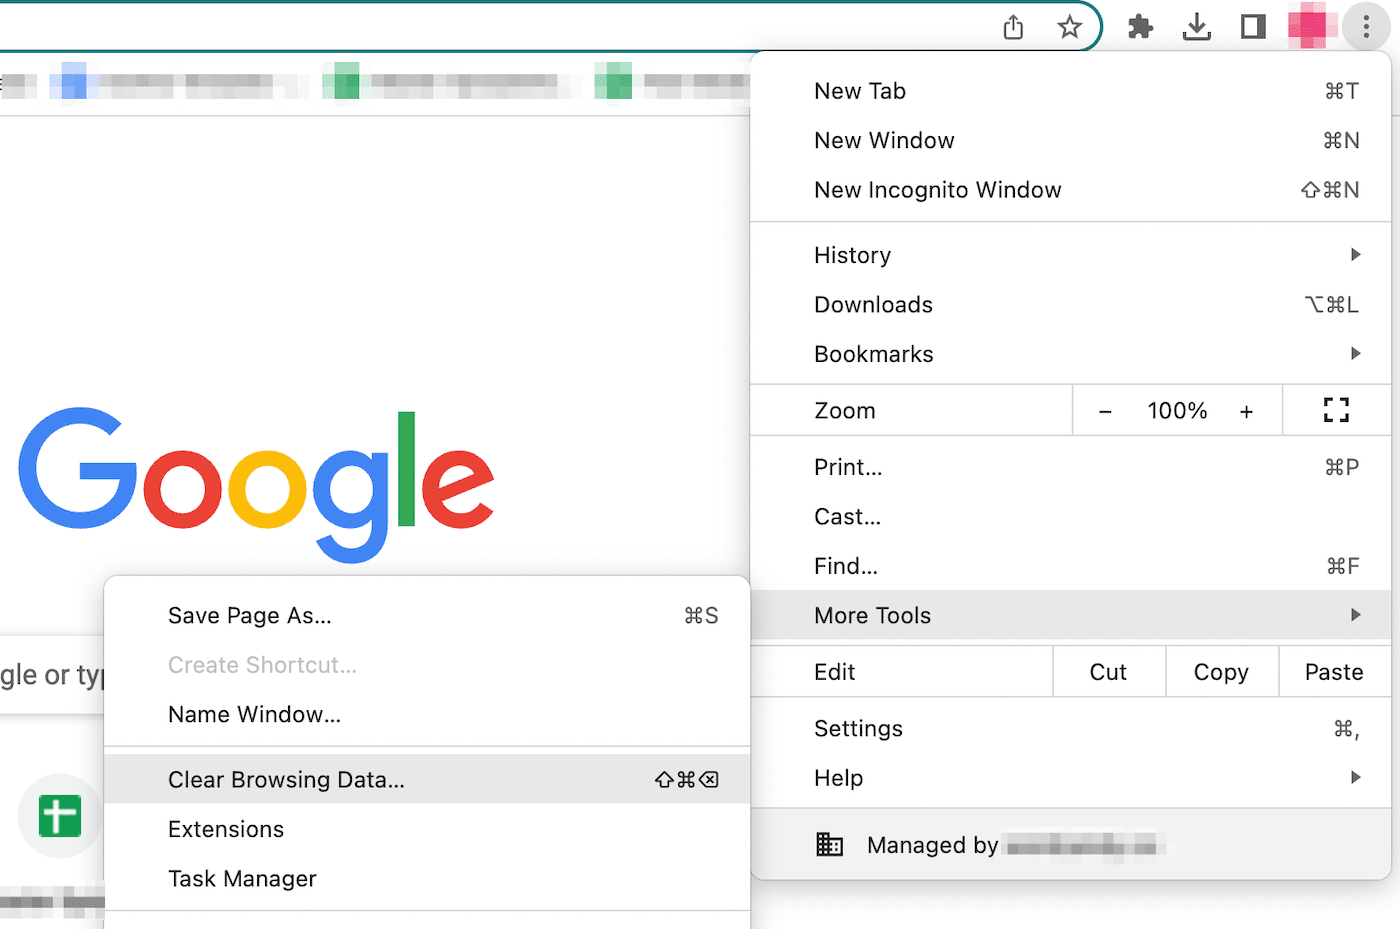 Clear Chrome’s browsing data